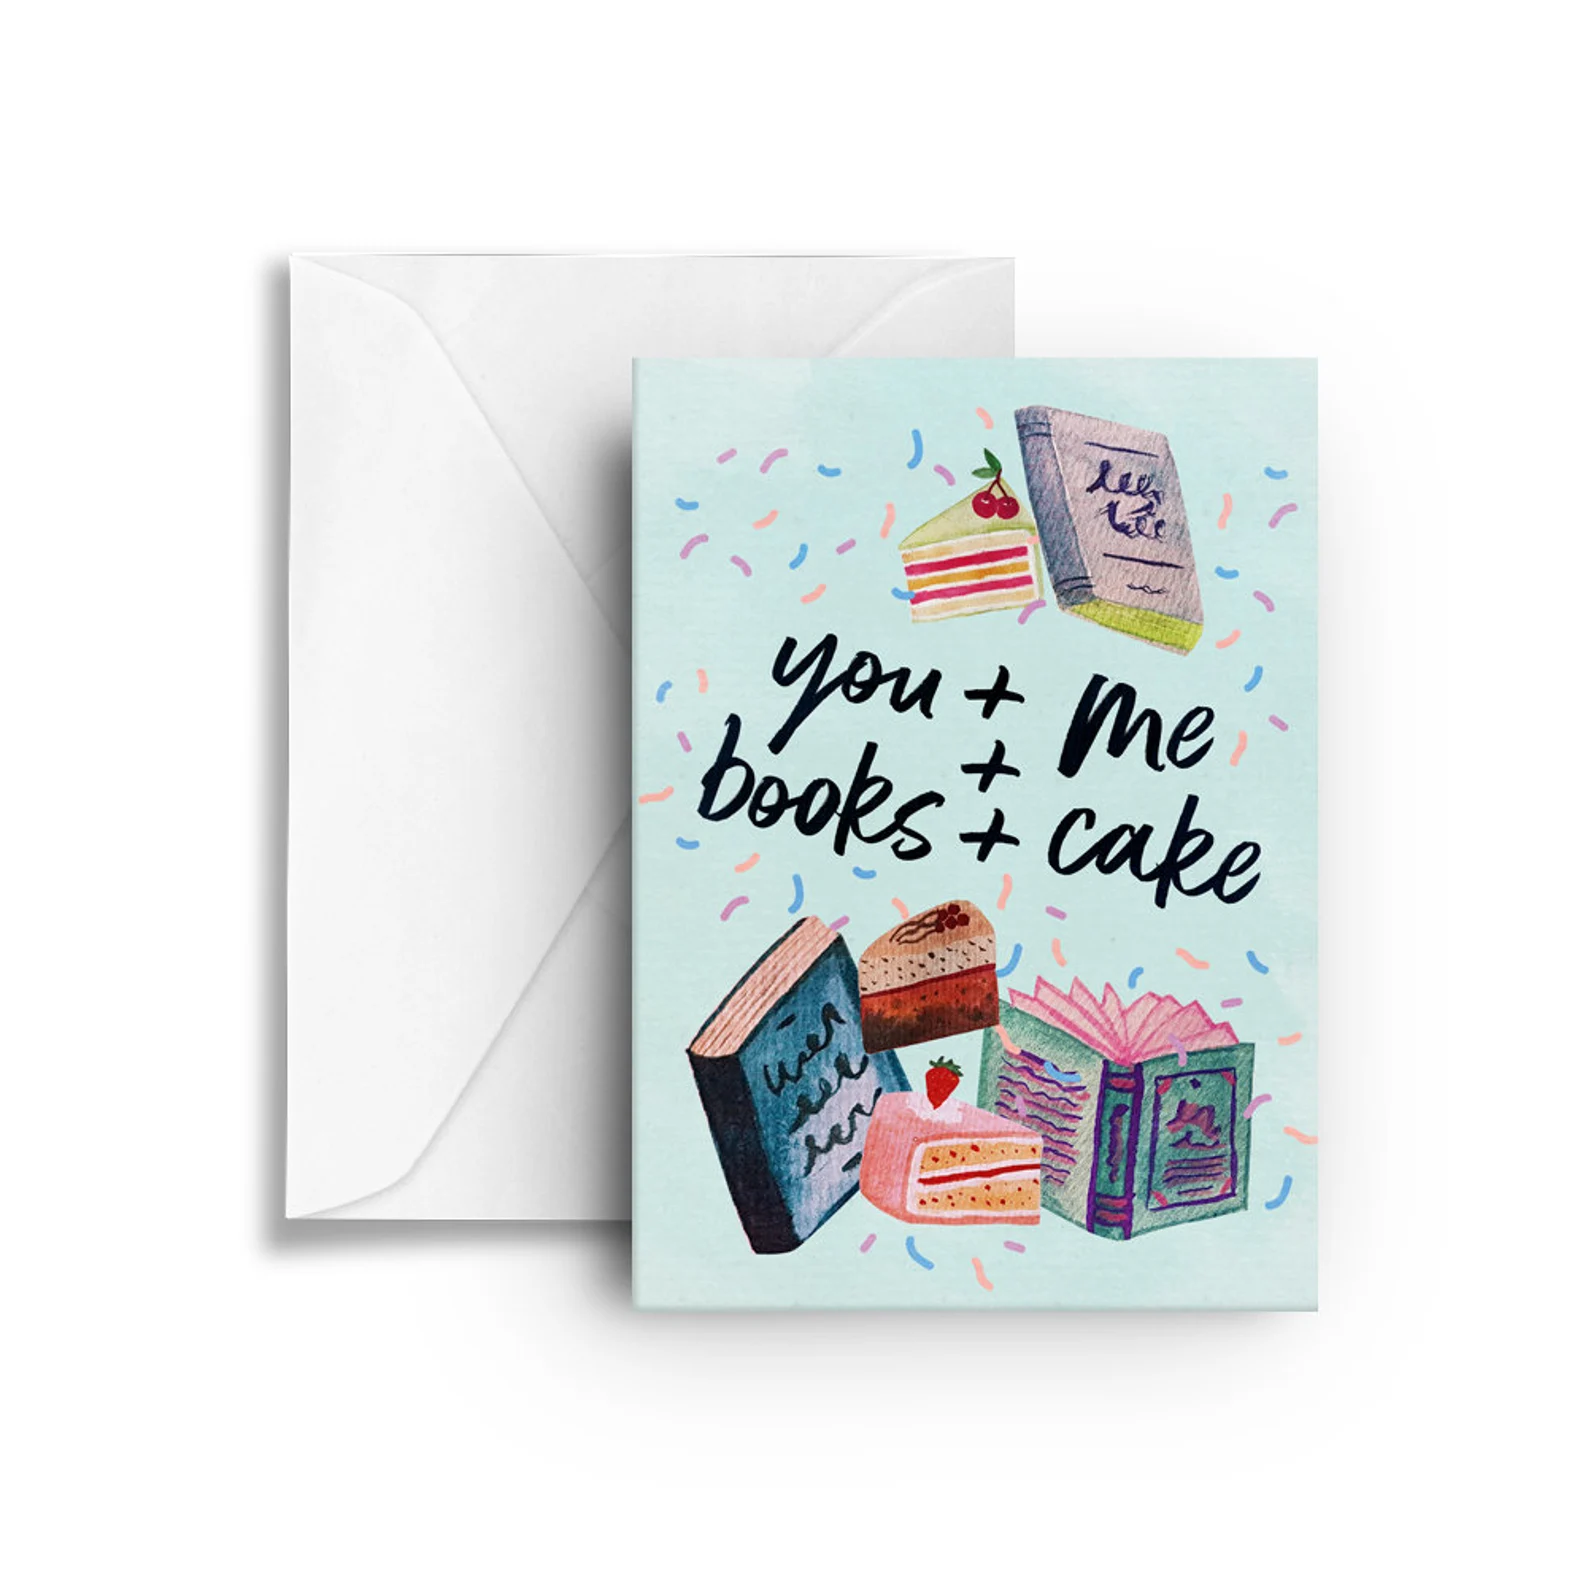 a card that reads "you + me + books + cake" and little illustrations of books and cake